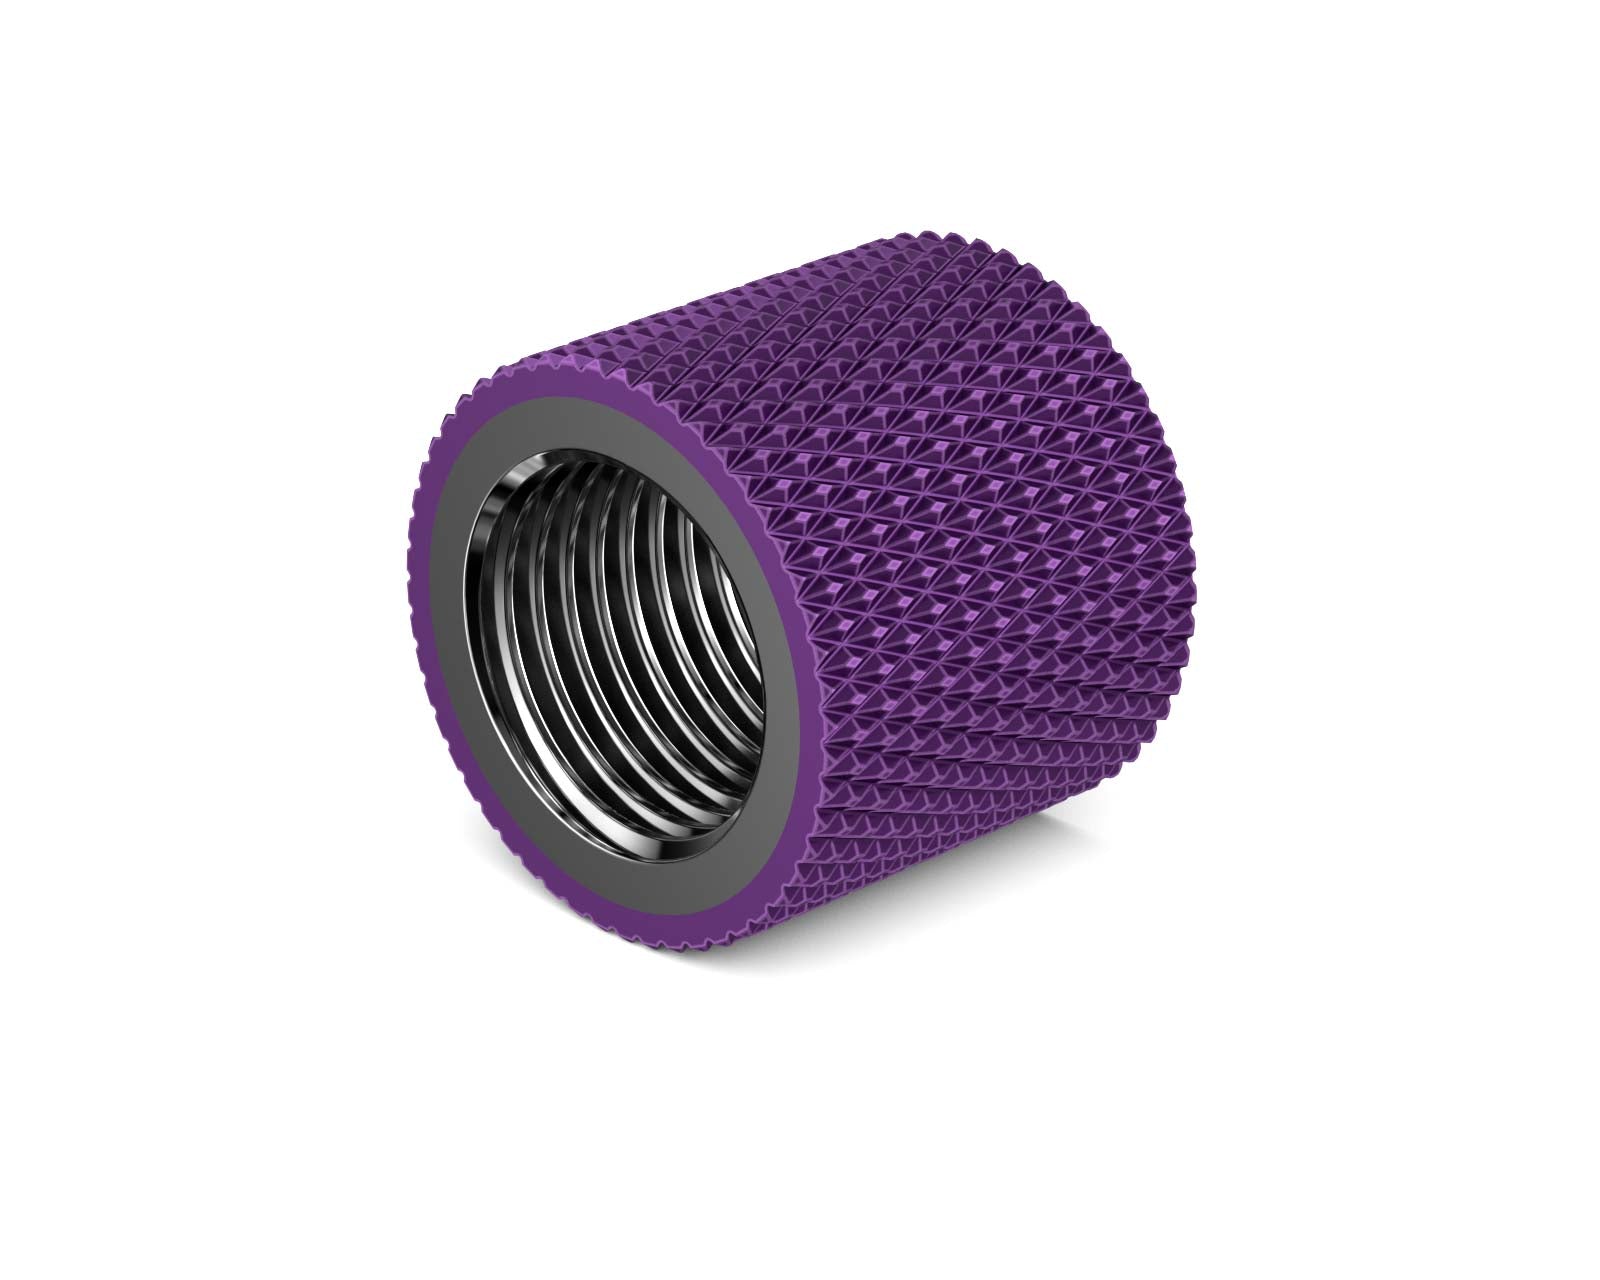 PrimoChill Dual Female G 1/4in. Straight SX Extension Coupler - PrimoChill - KEEPING IT COOL Candy Purple